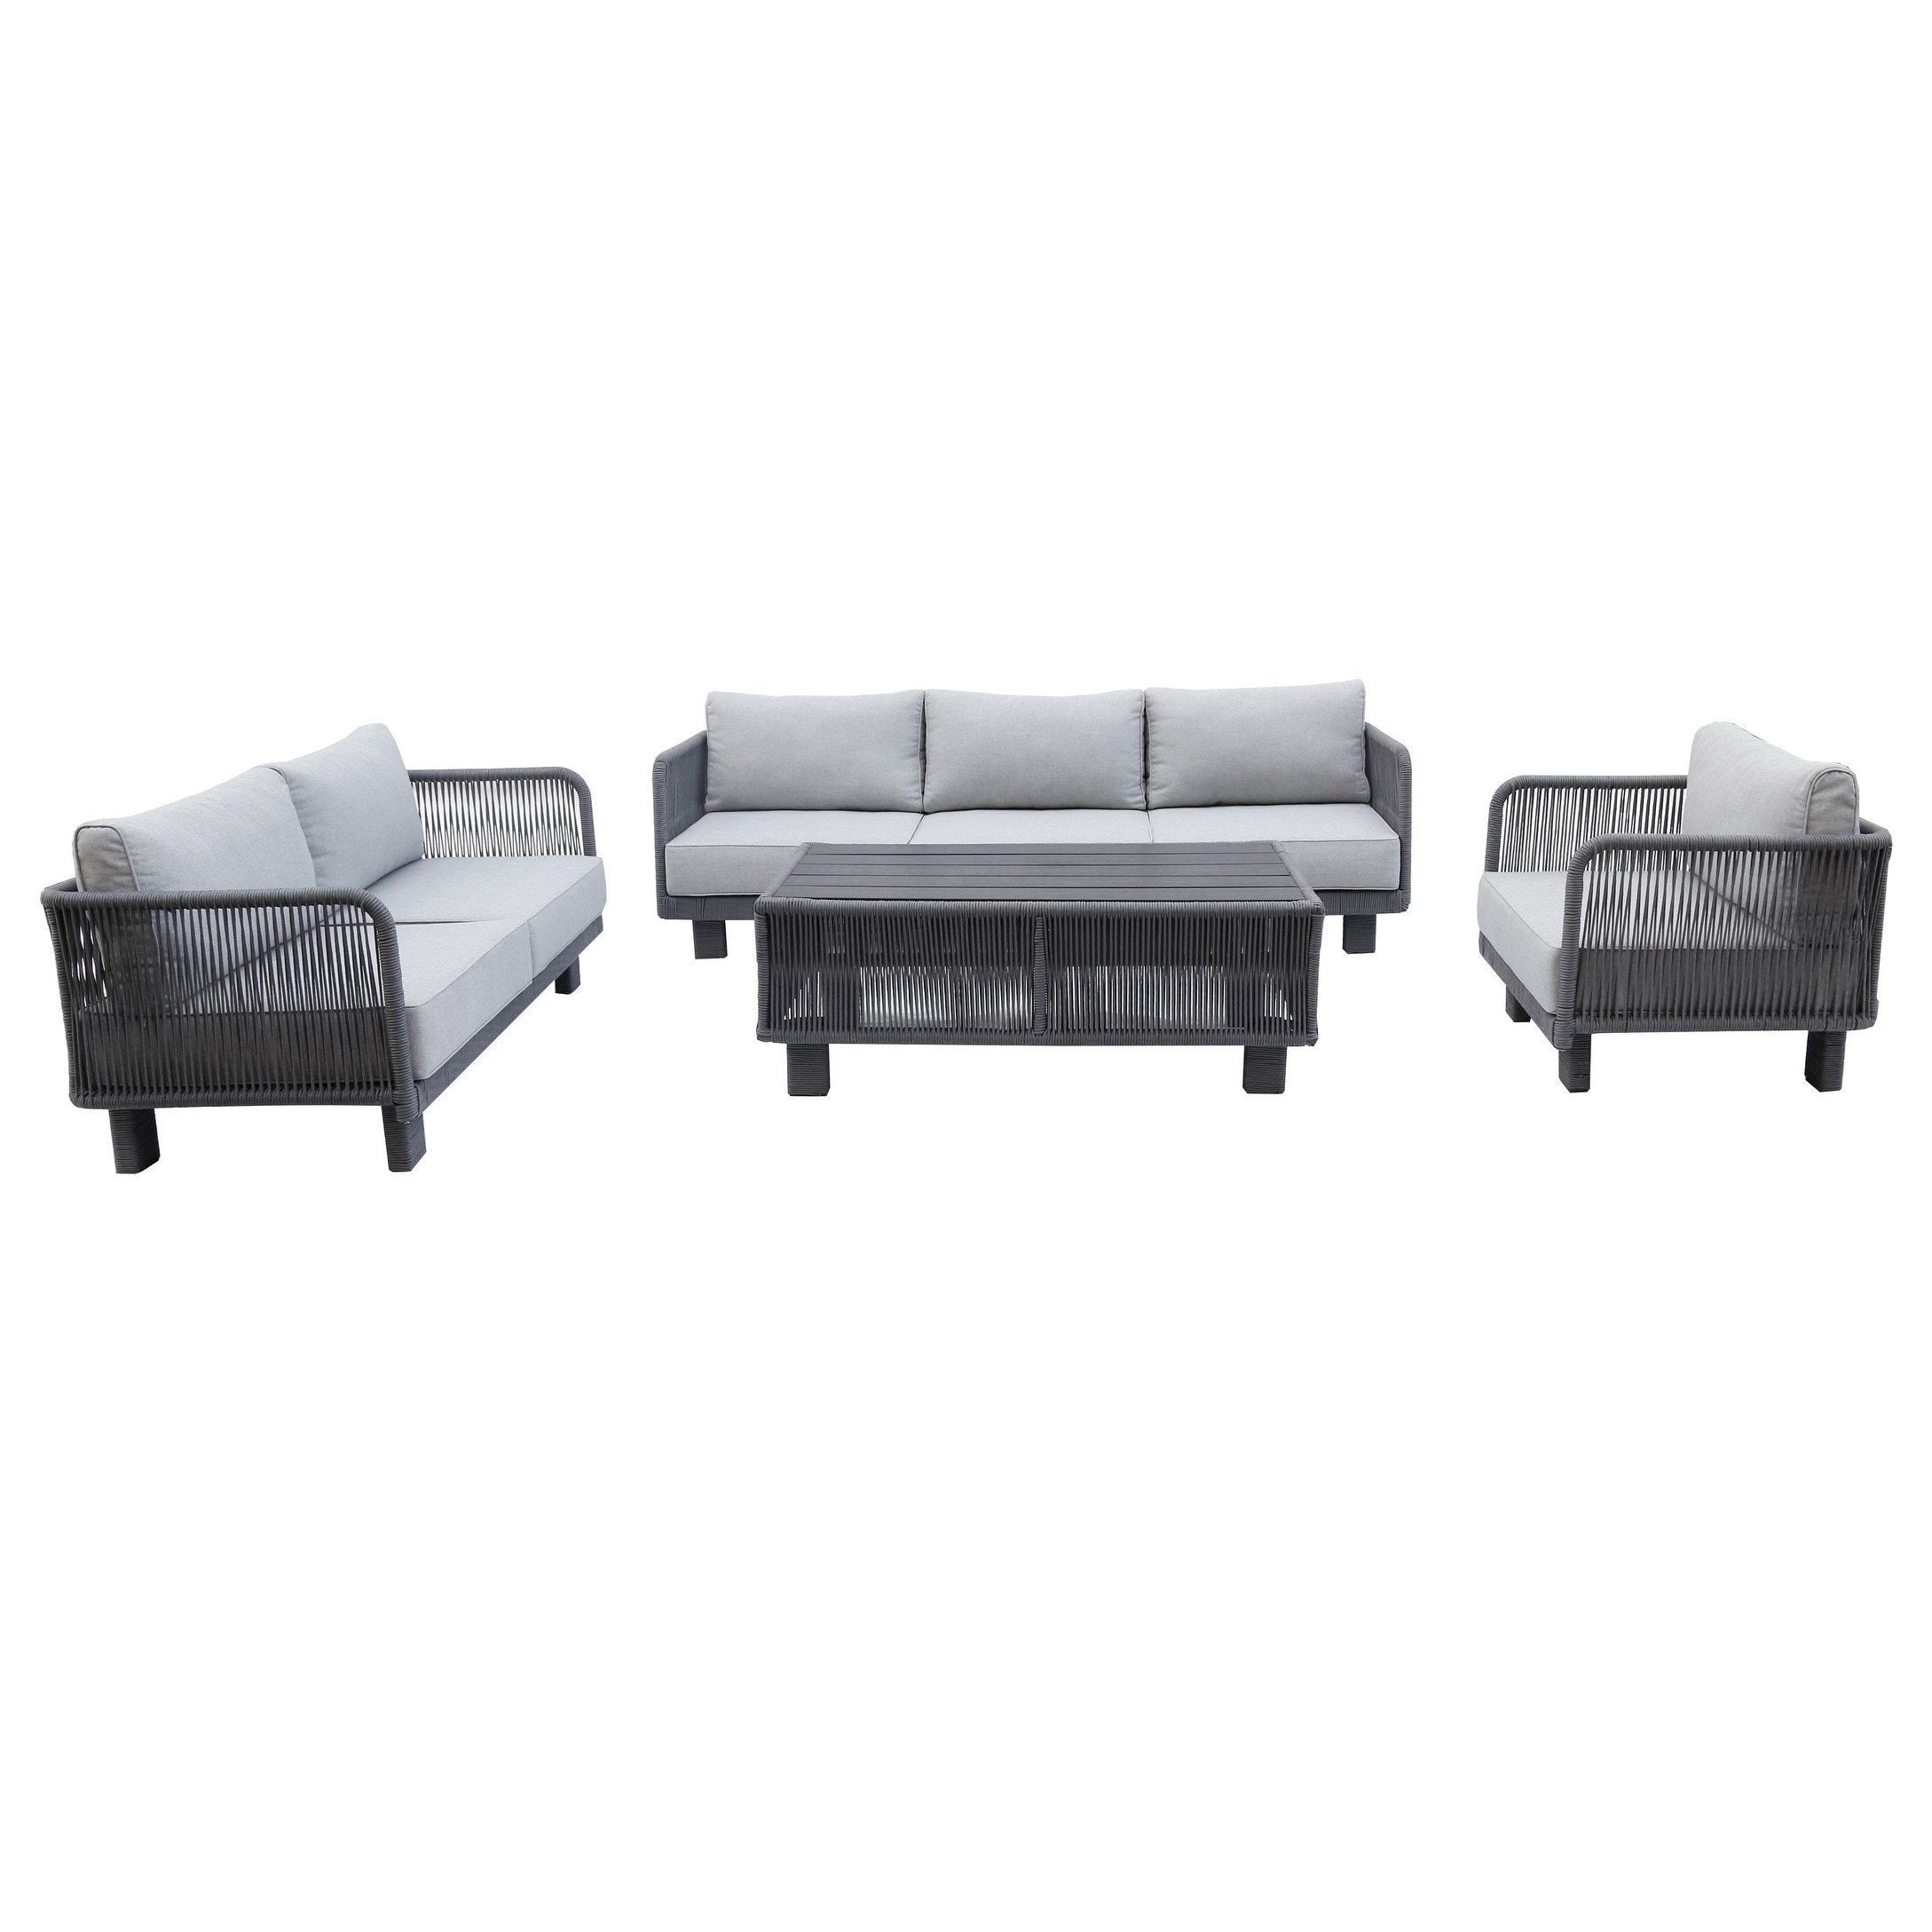 Cancun Aluminum Deep Seating Set With Silver Cushion